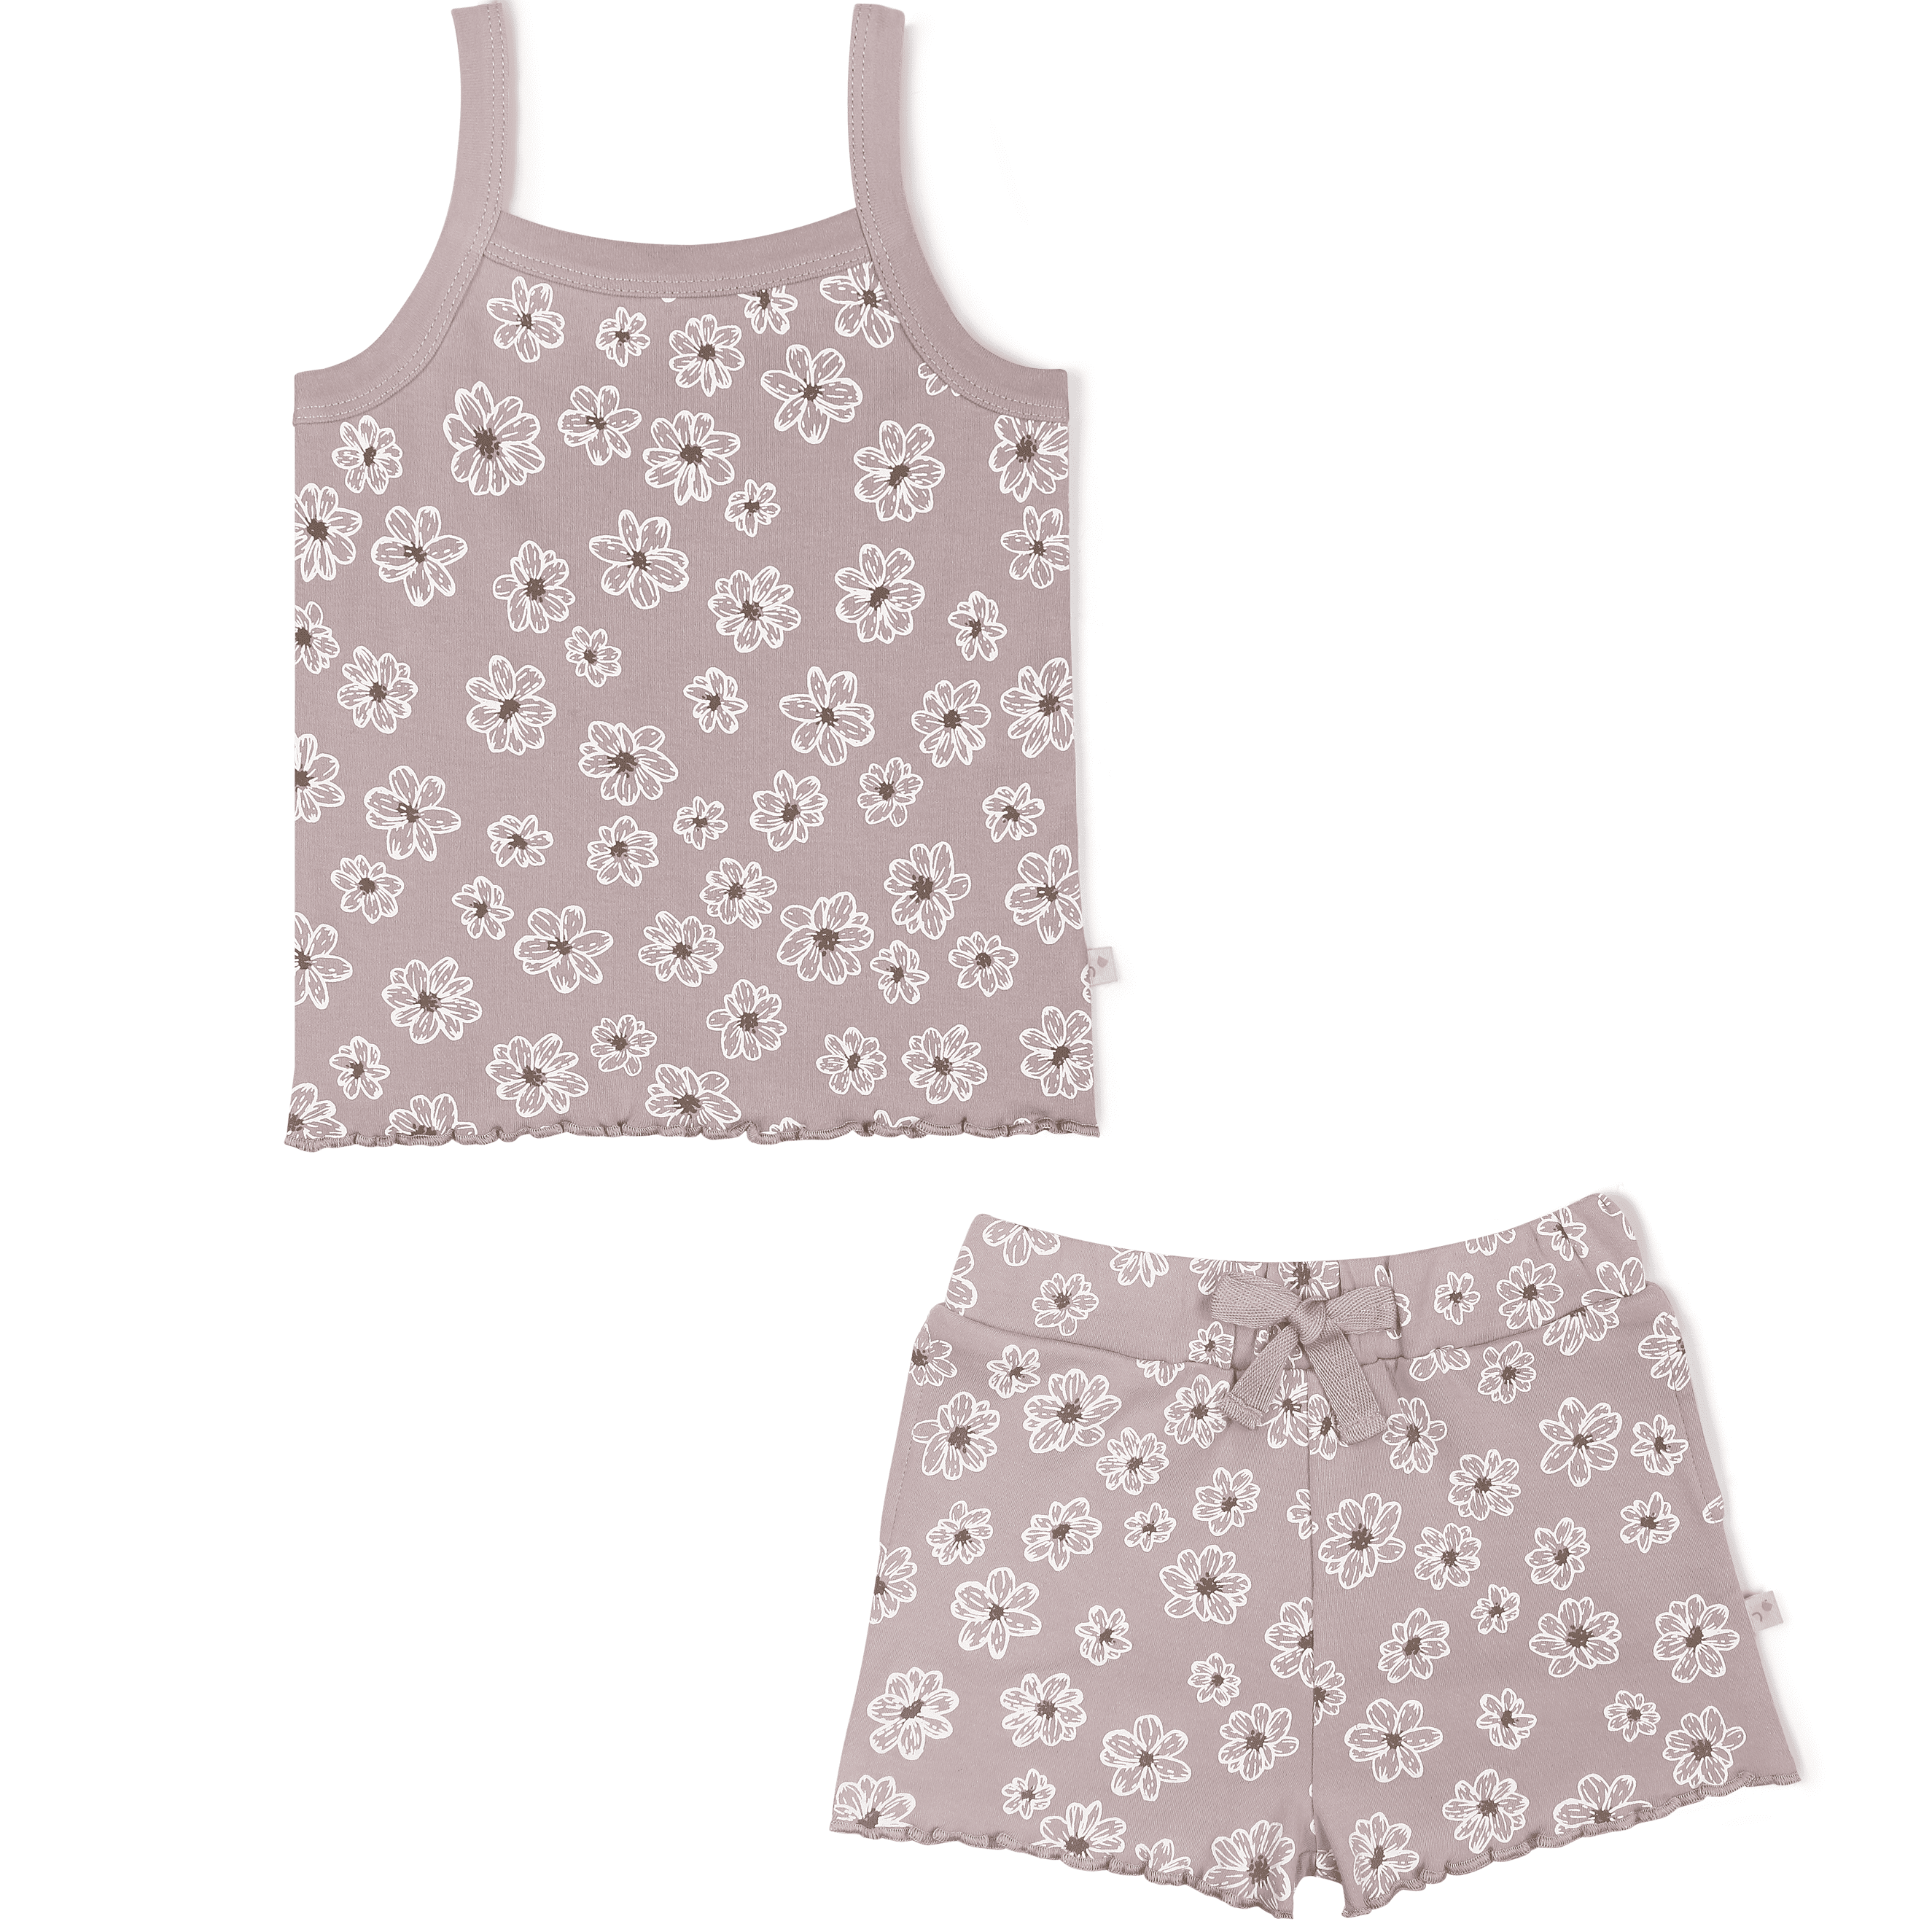 A gray tank top and matching shorts set with a white floral pattern, displayed on a white background. The shorts have a drawstring waist and are ideal for a baby girl.
Product Name: Makemake Organics Organic Spaghetti Top & Shorts Set - Daisies